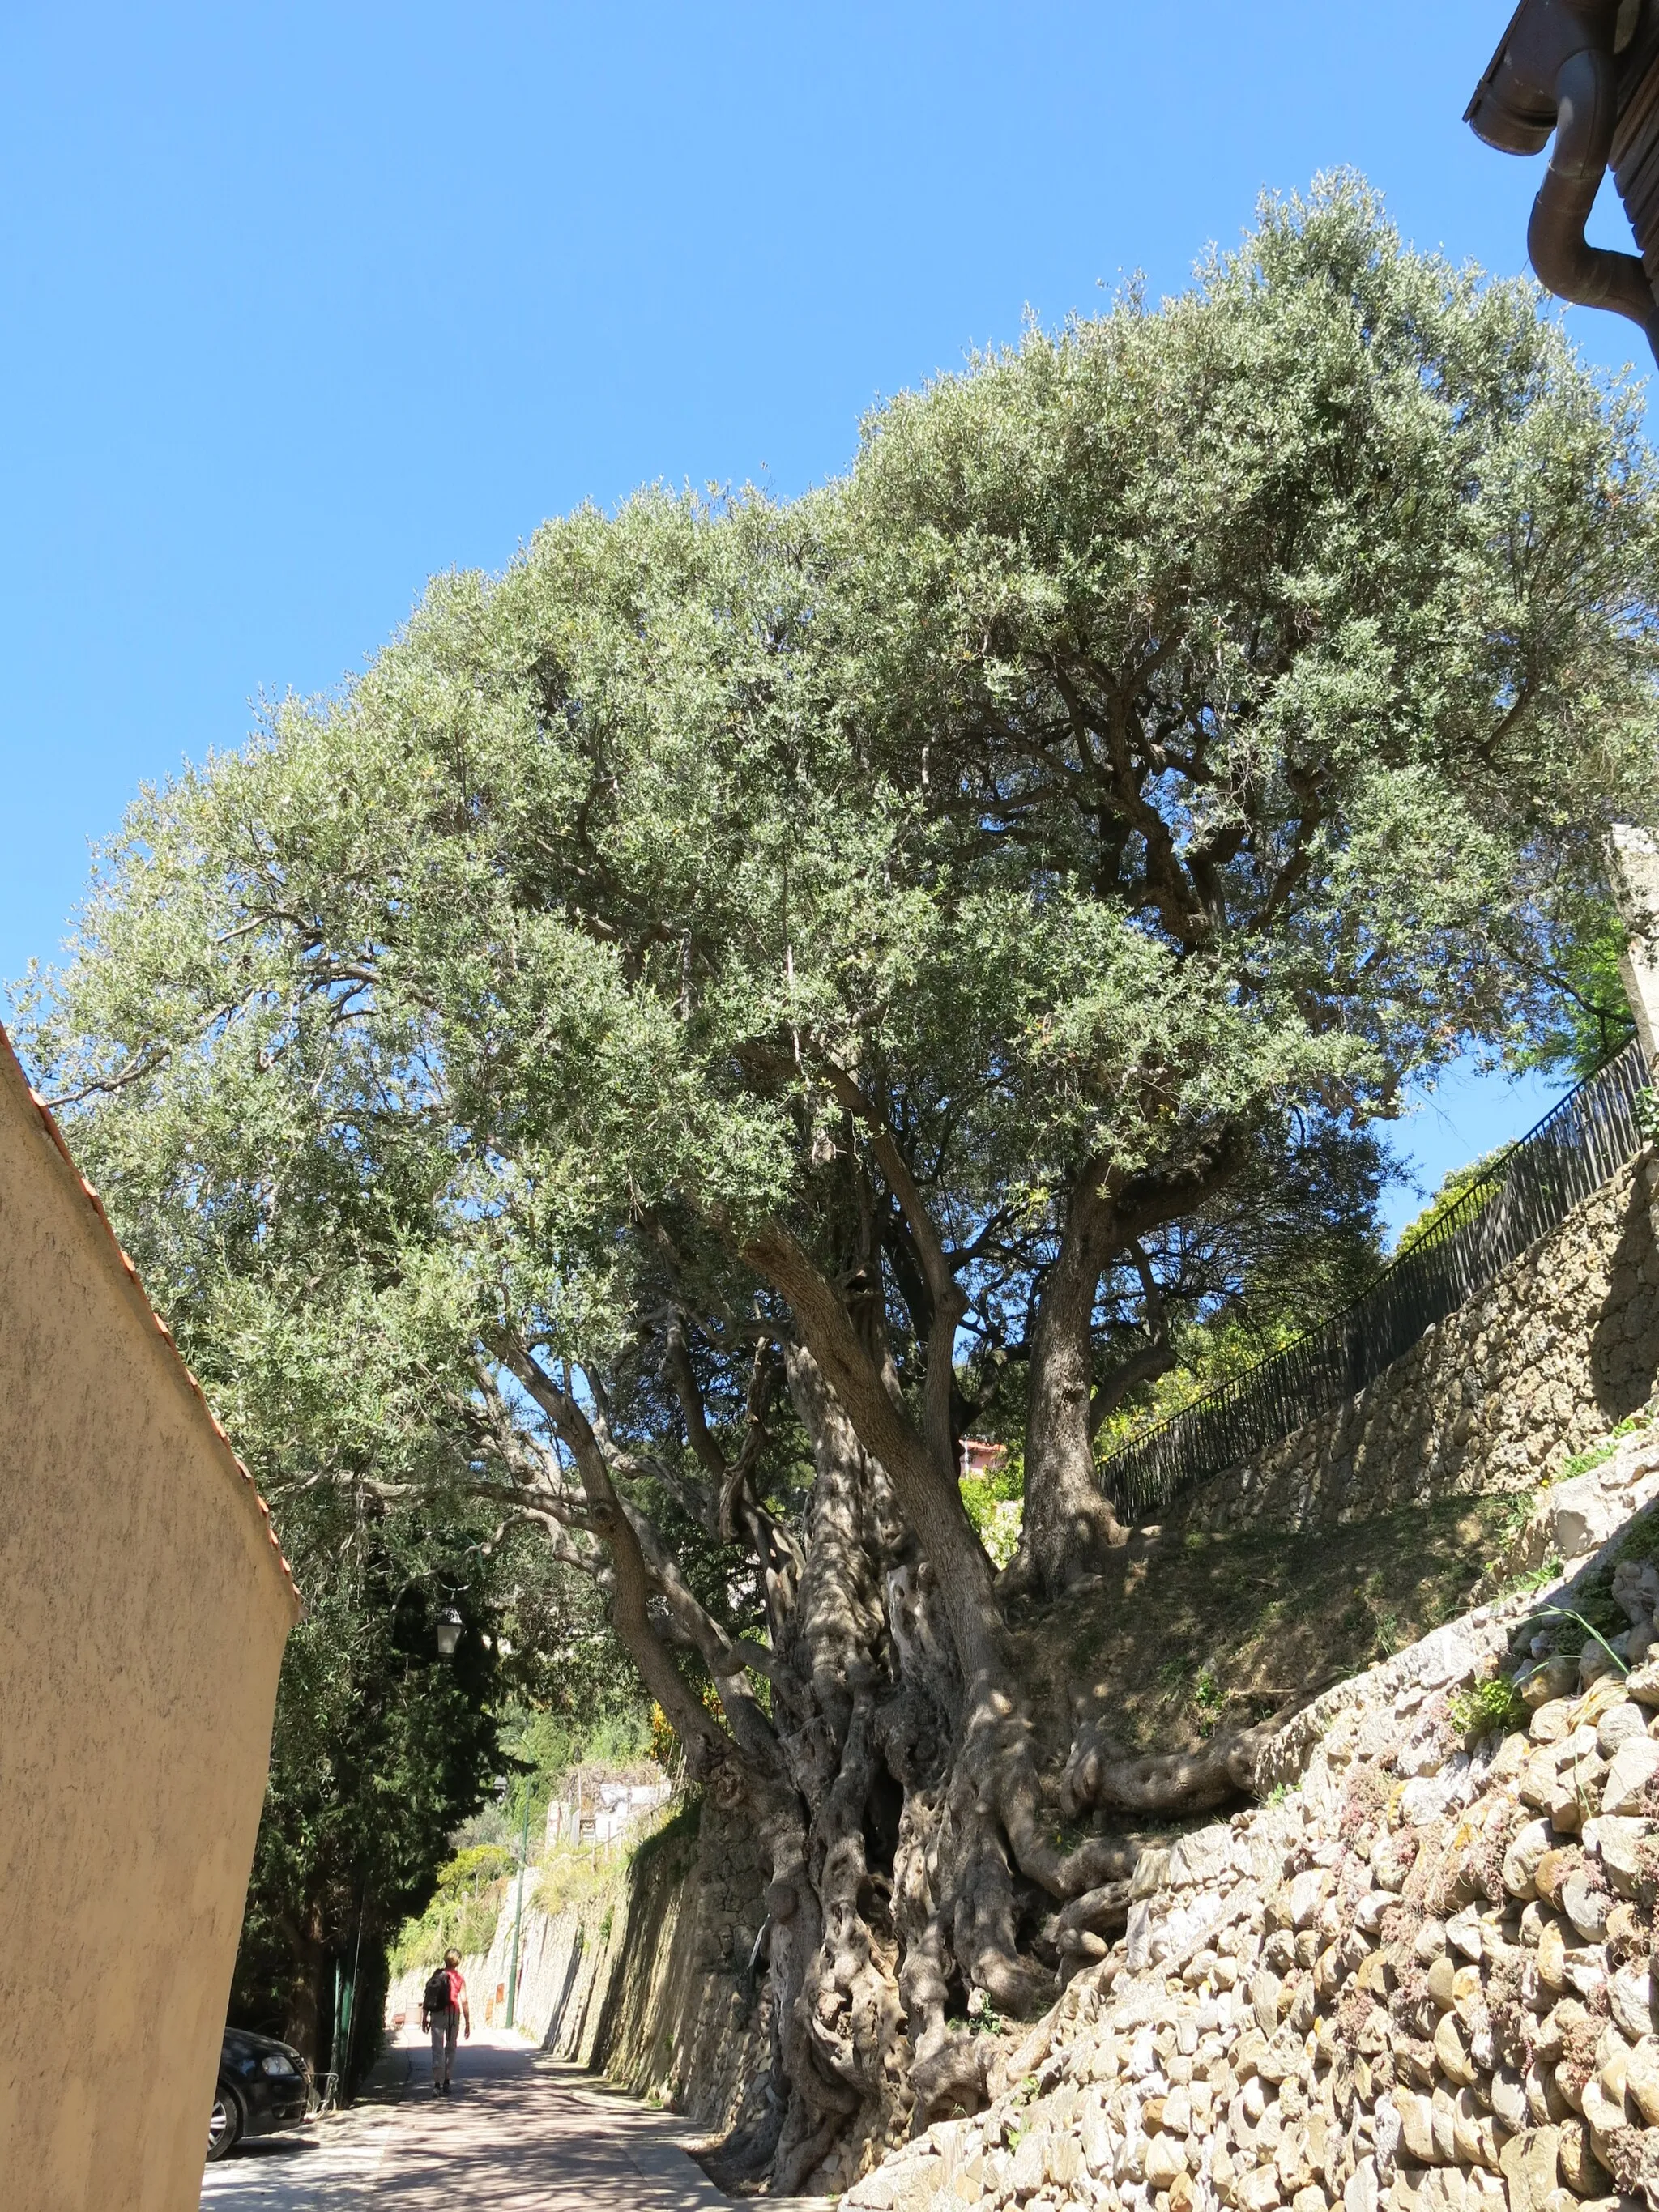 Photo showing: The millenium olive tree in Roquebrune-Cap-Martin (Alpes-Maritimes, France) showing that it grows along the wall.